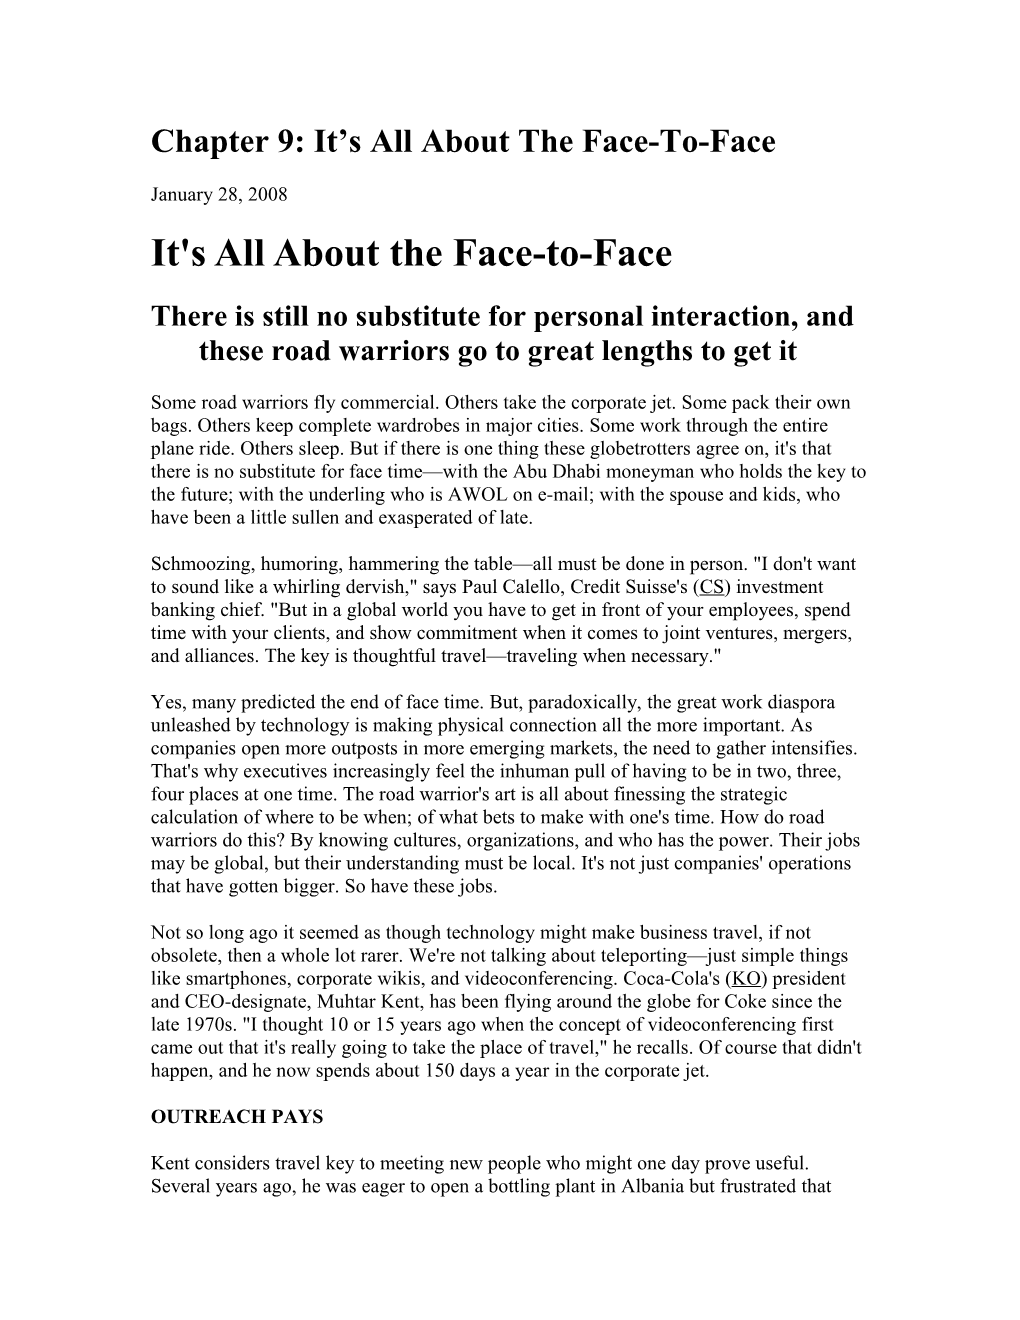 Chapter 9: It S All About the Face-To-Face